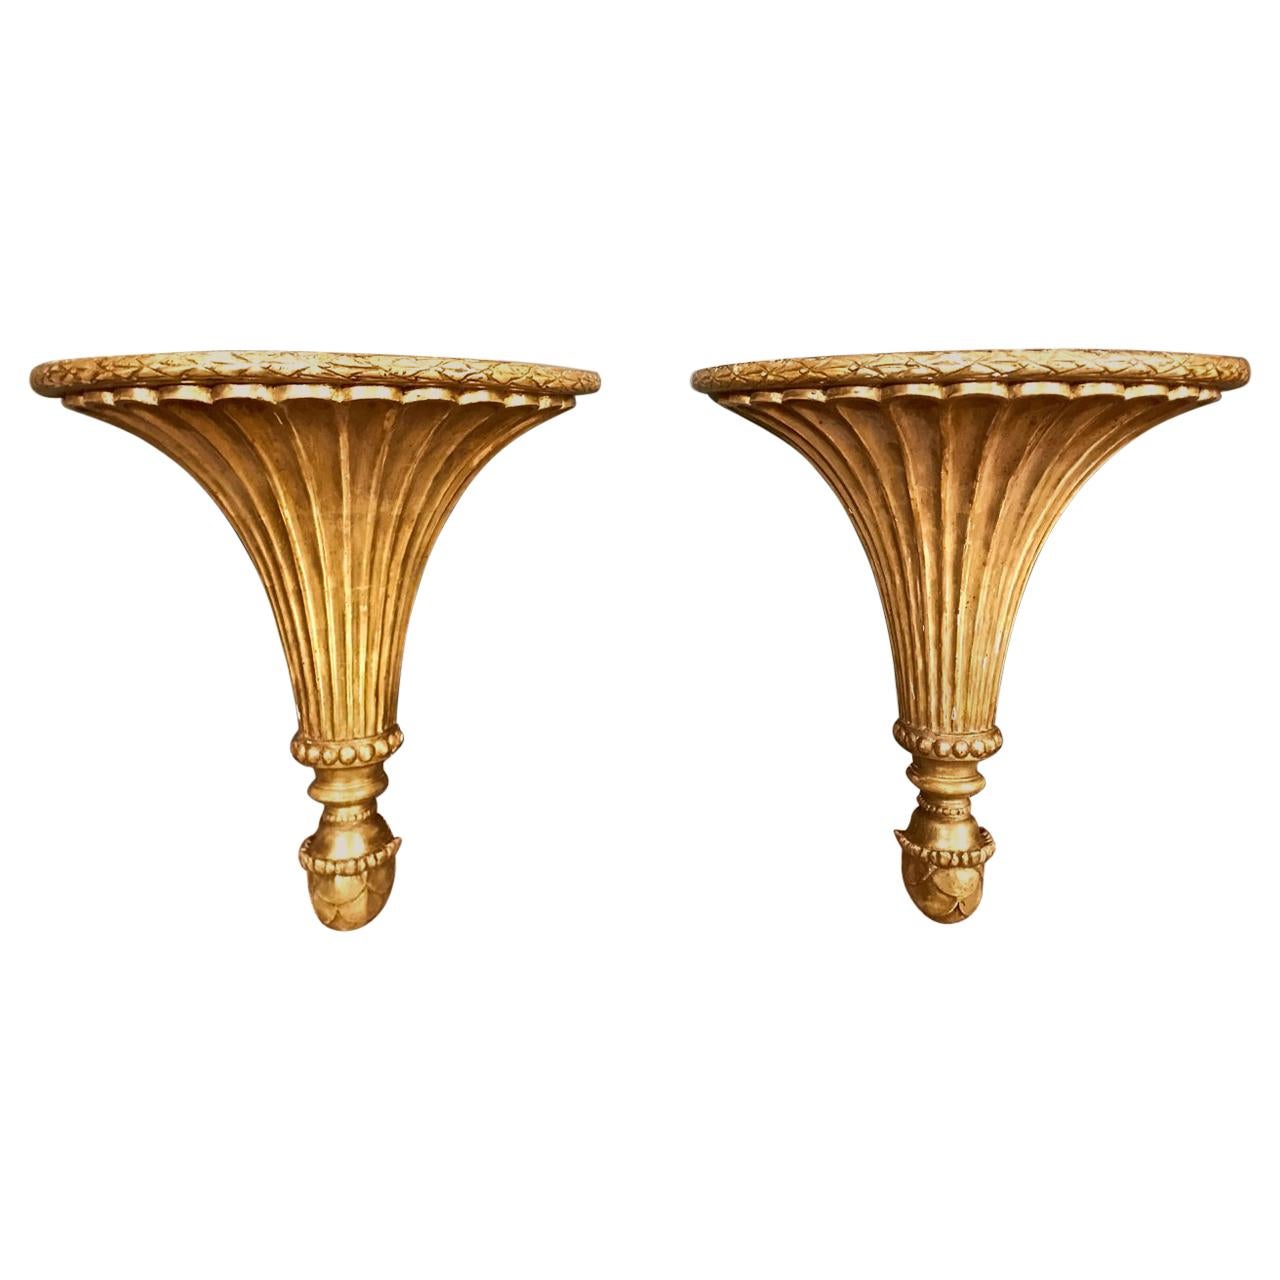 Late 18th Century Neoclassical Carved Gilt Wood Brackets or Sconces, Pair